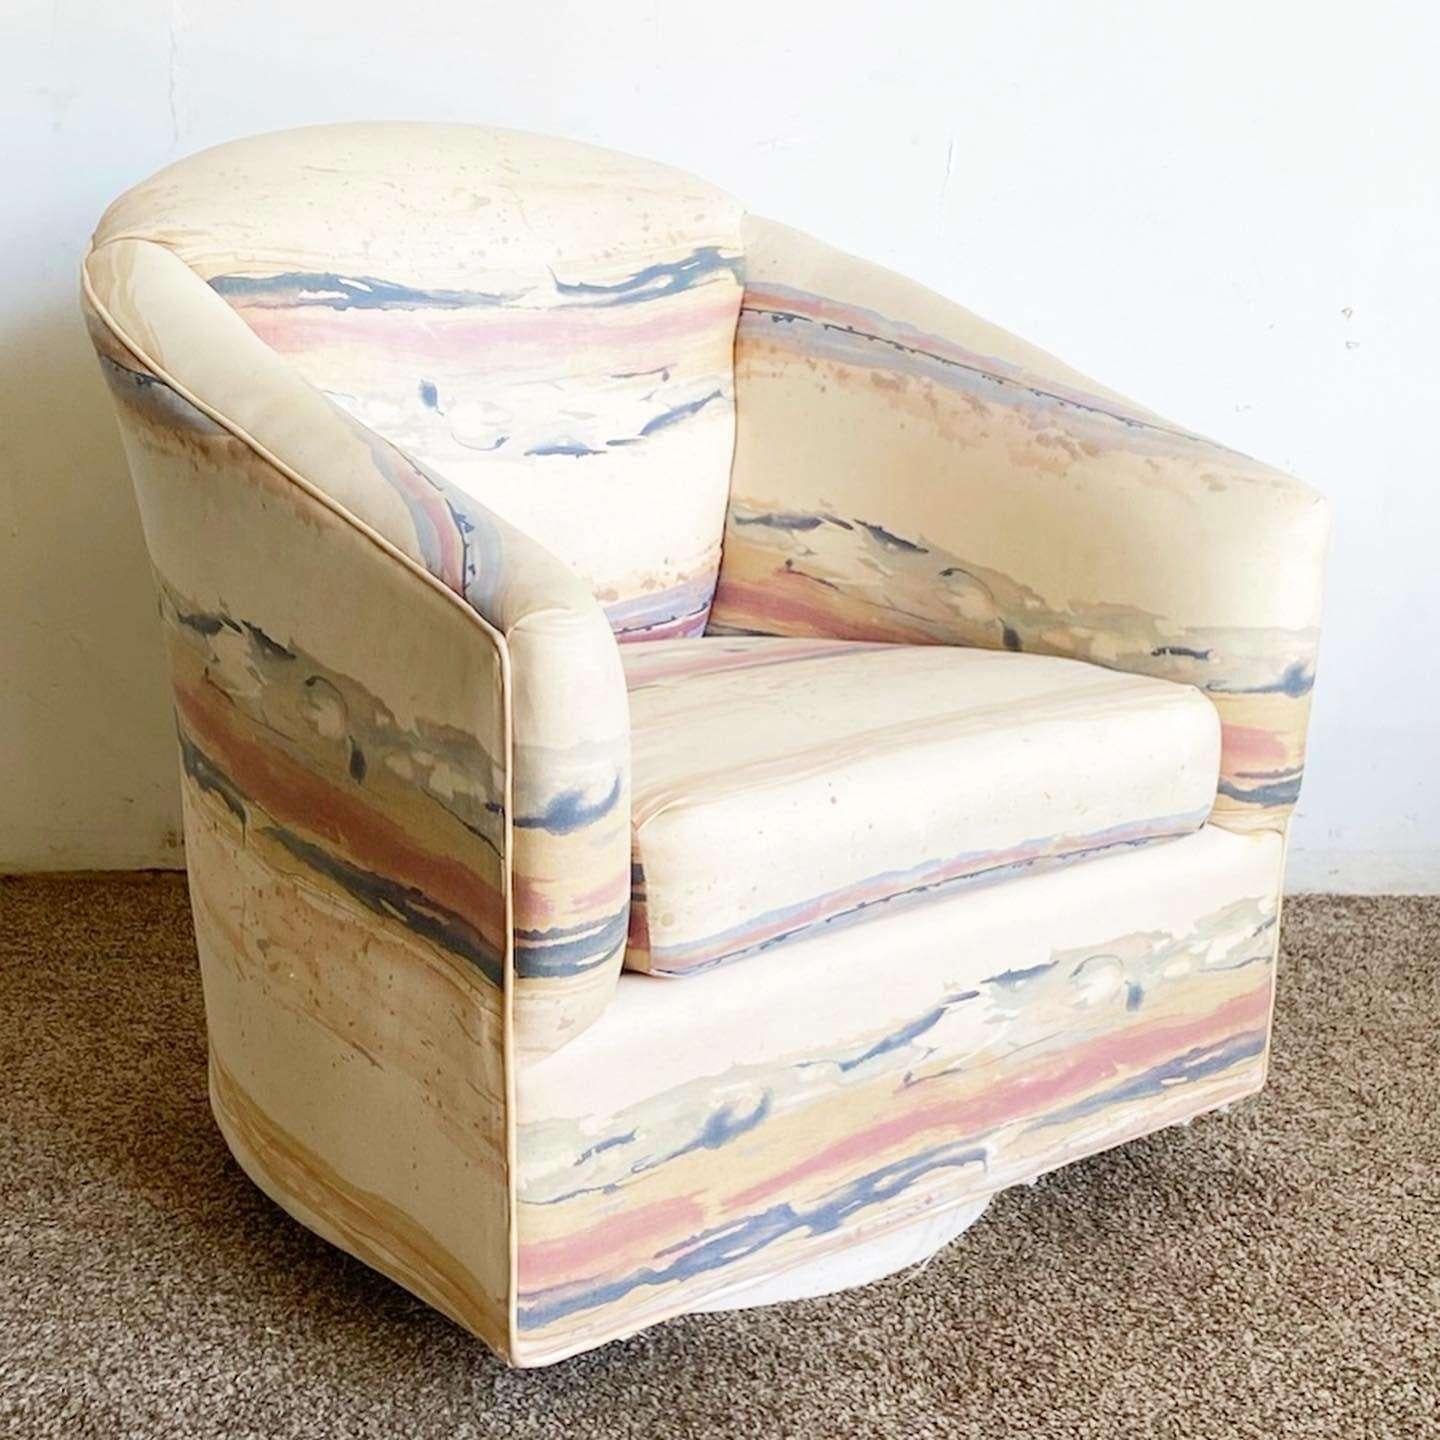 Incredible vintage postmodern swivel barrel chair. Features a cream fabric with blue and pink streaks.

Seat height is 17.5 in